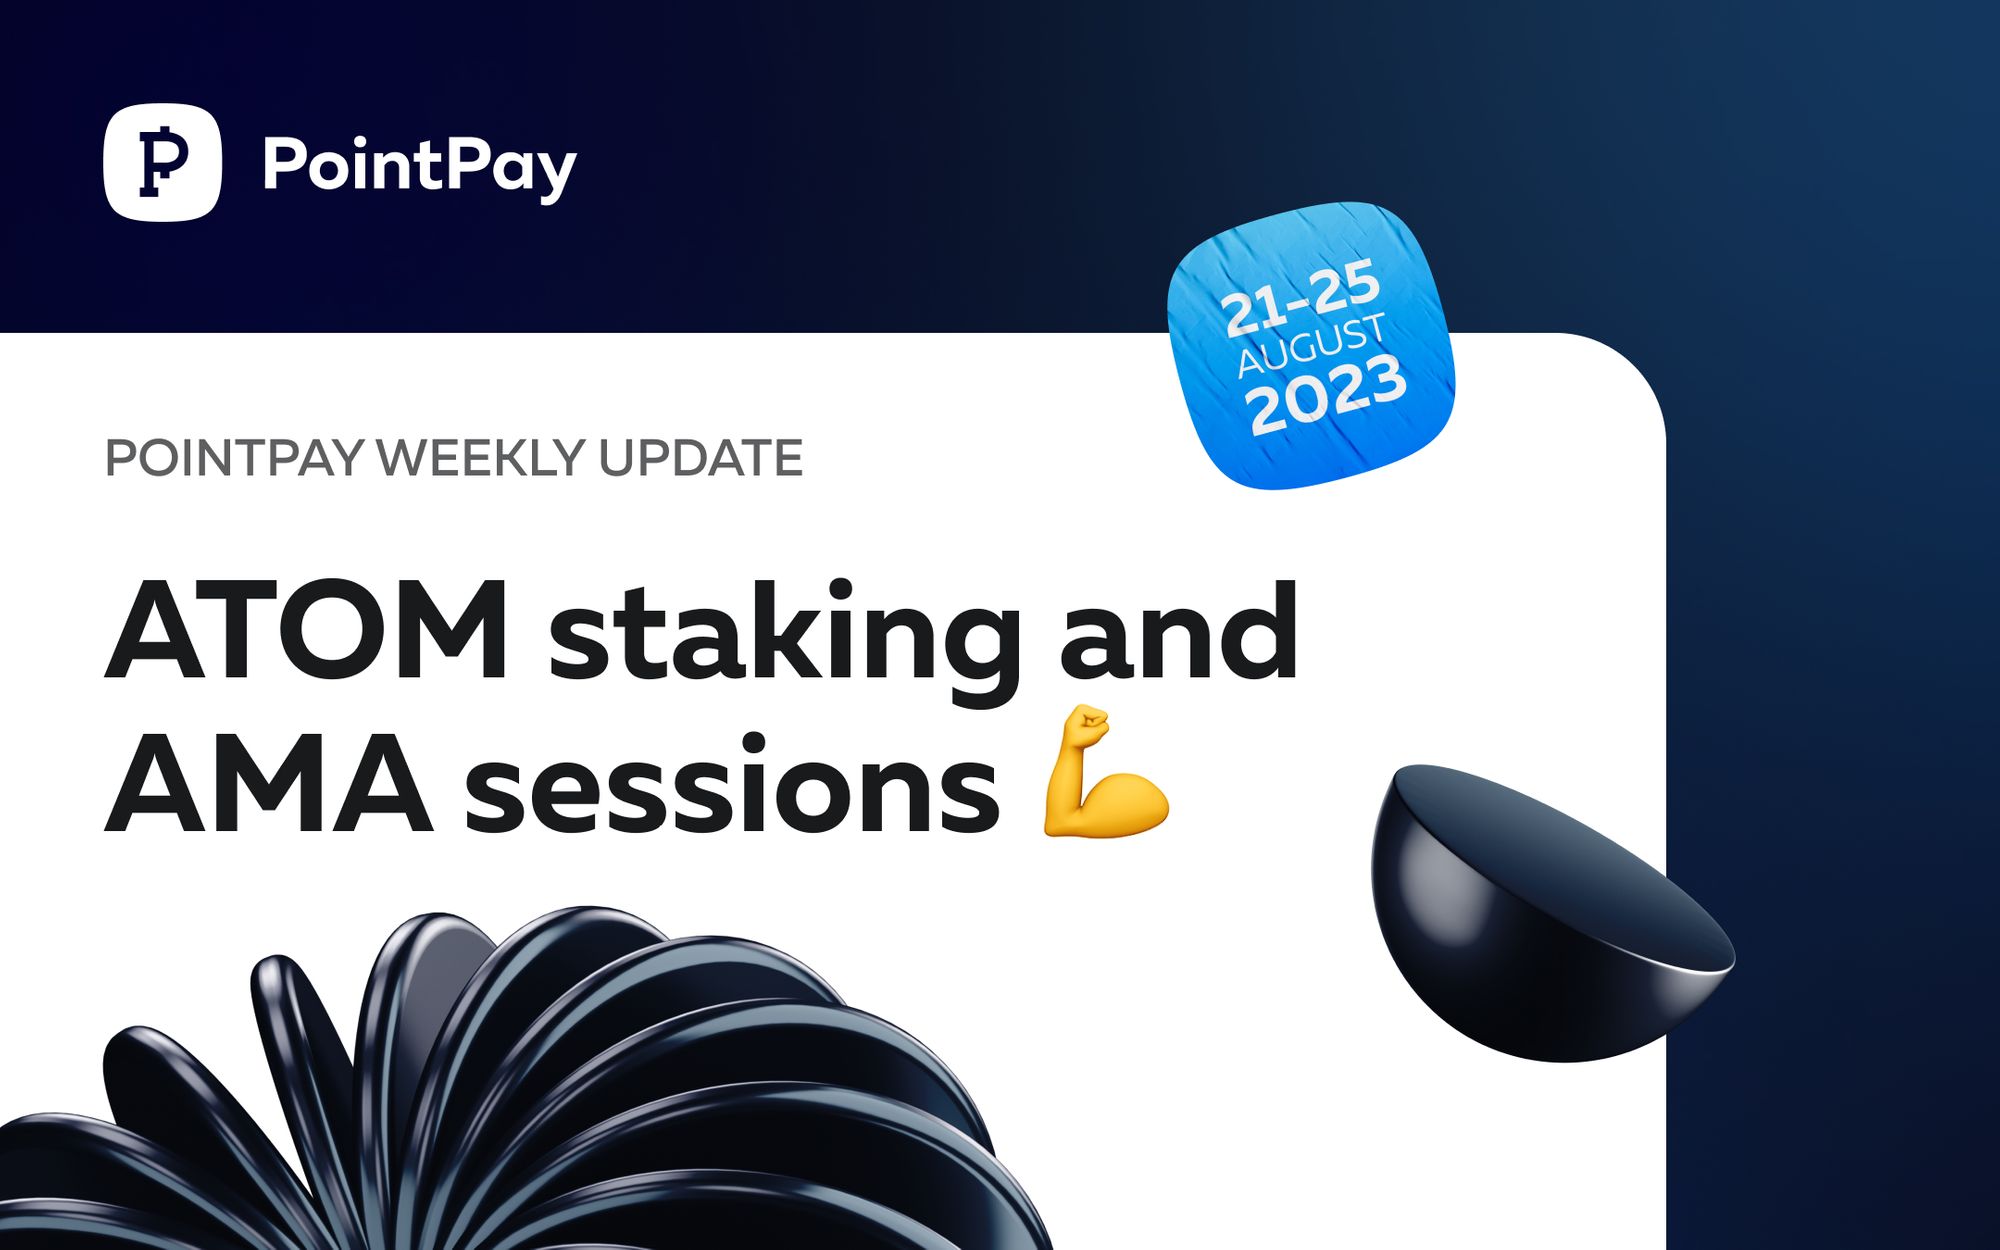 PointPay Weekly Update (21-25 August 2023)